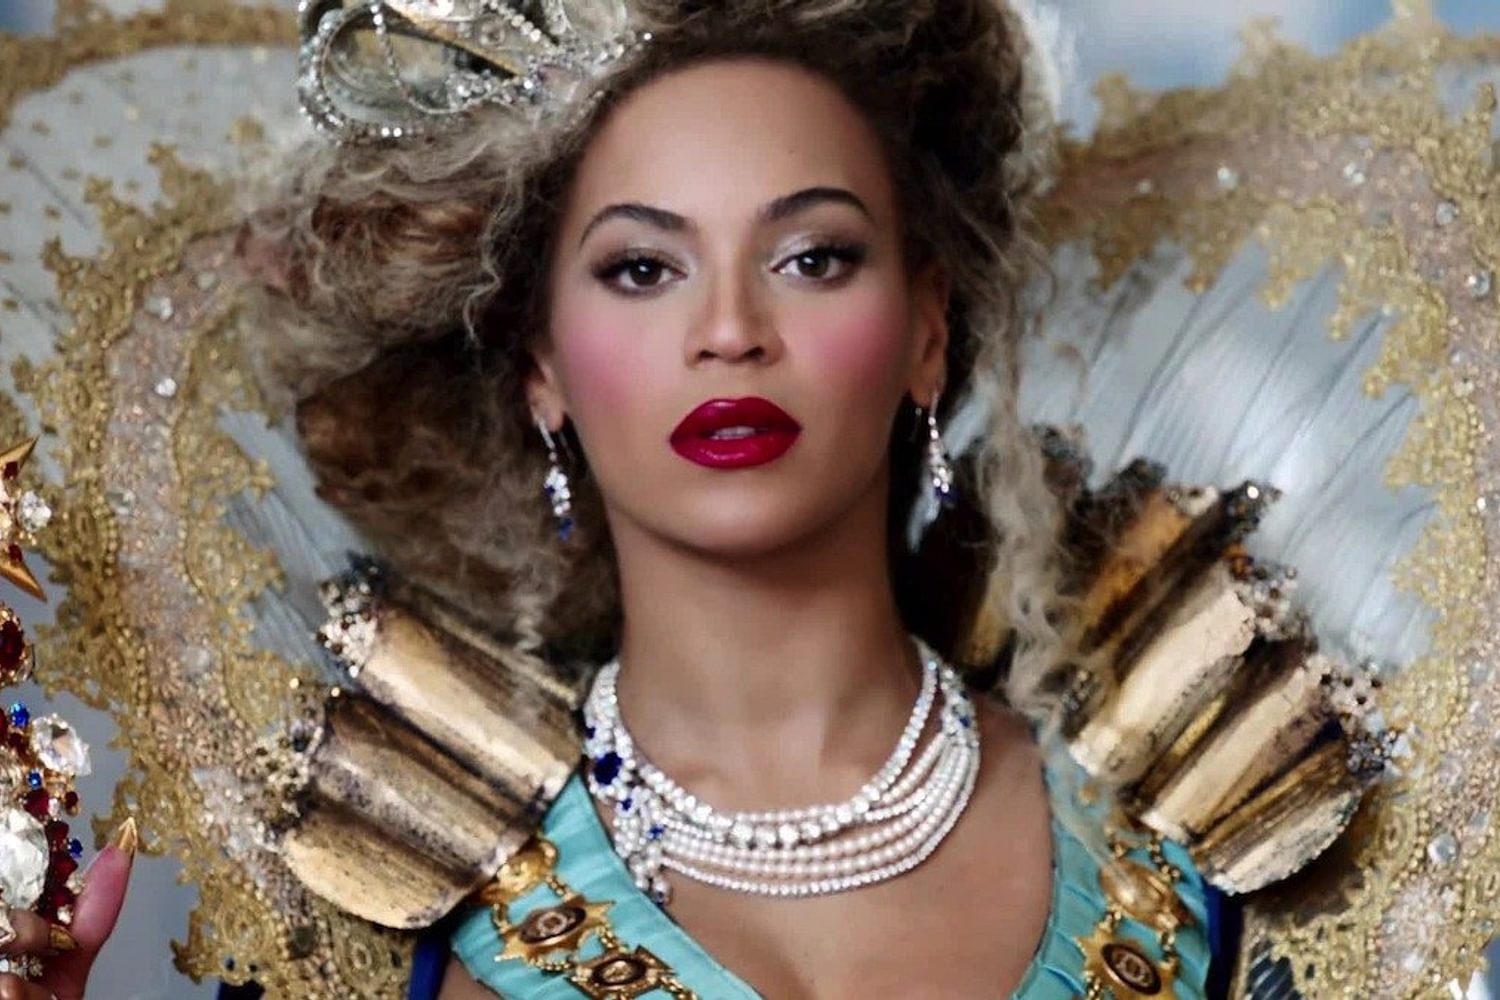 Beyoncé and The Weeknd will headline Budweiser Made in America festival